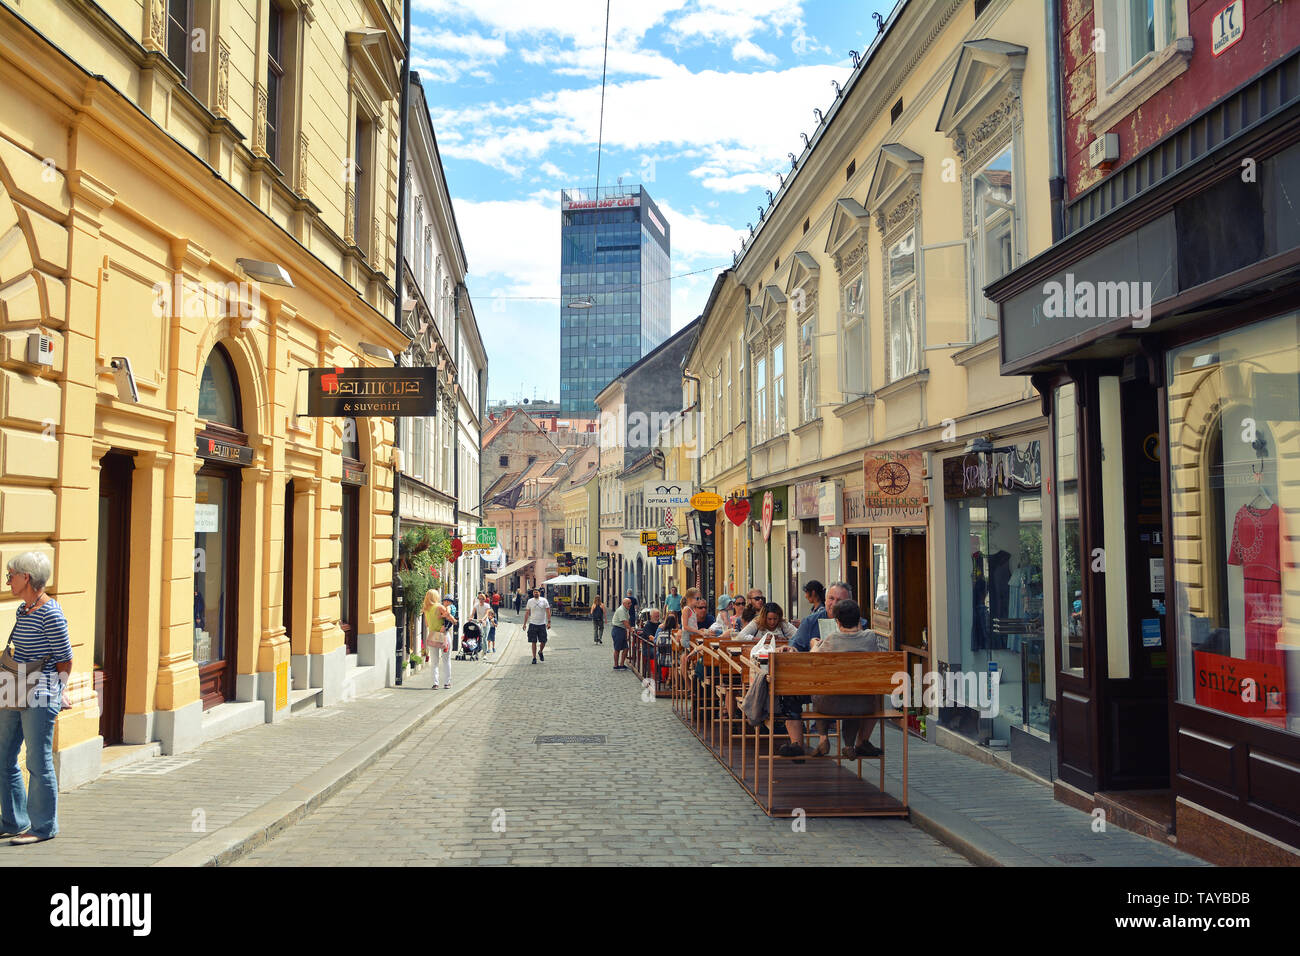 ZAGREB, CROATIA - JULY 15, 2017. Radiceva Street view in Old town of Zagreb with Zagreb 360° cafe and observation deck, Croatia Stock Photo